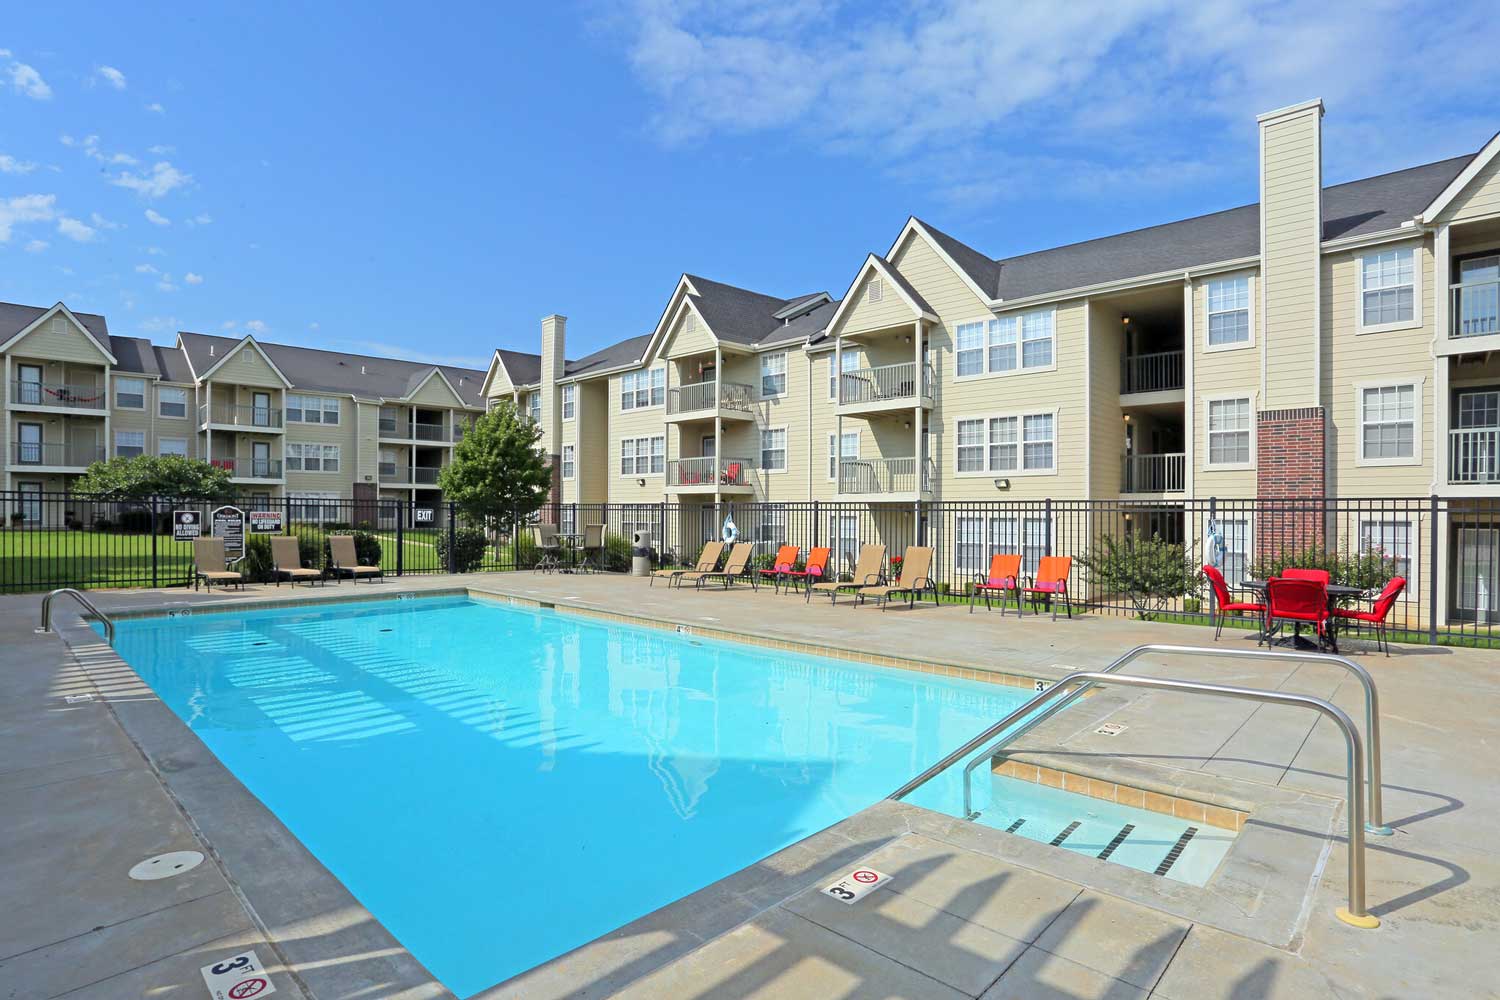 Sparkling Pool at the Oakmont Apartment Homes in Catoosa, OK